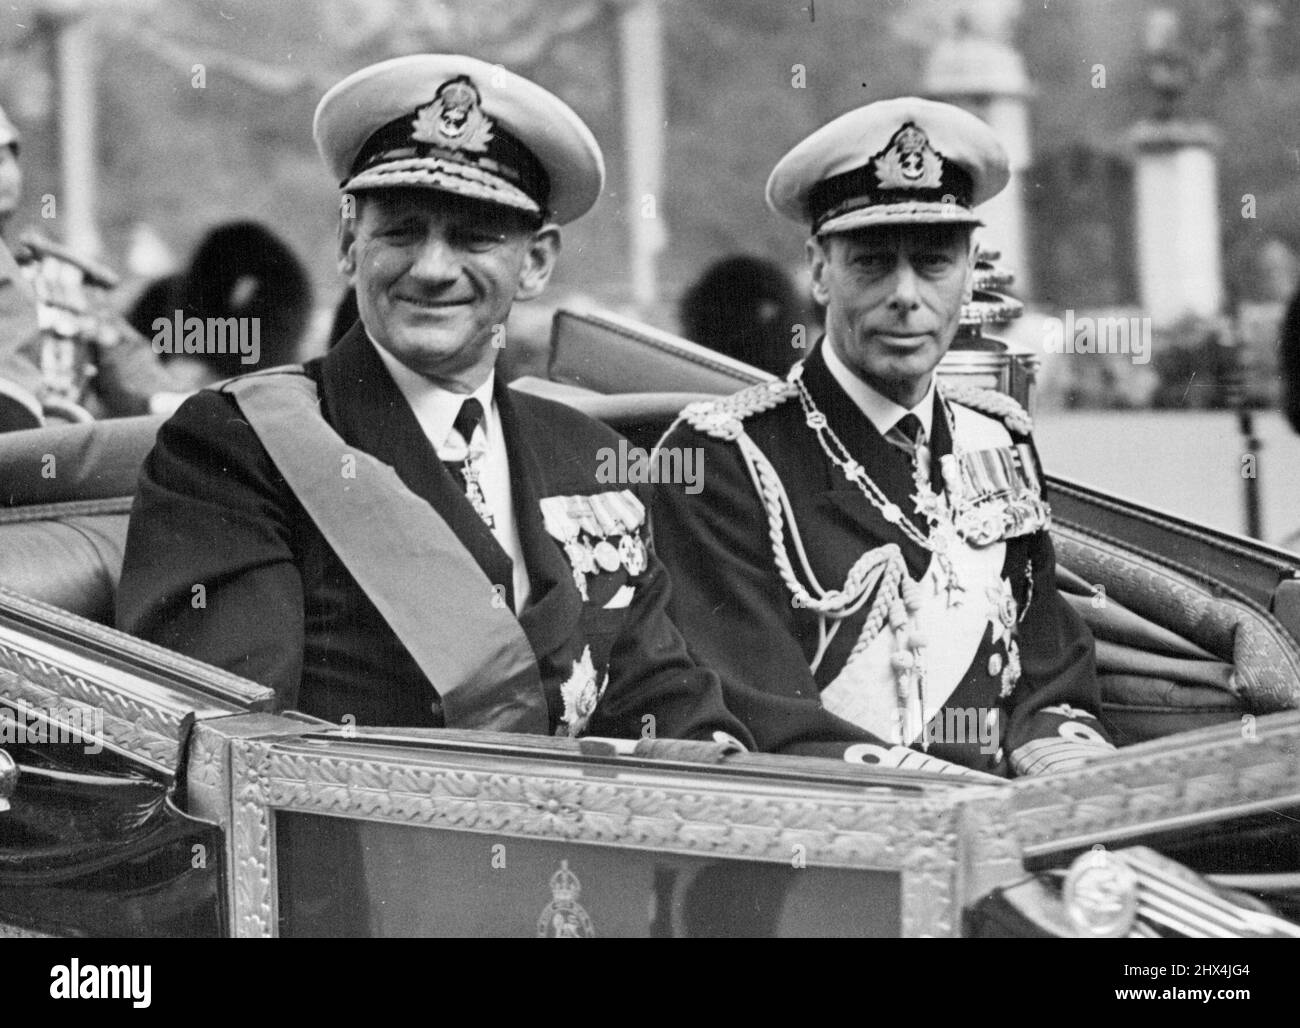 Danish Royalty arrive for State visit. King Frederik of Denmark (Left) and King George of Britain, smile as they are driven into the gates of Buckingham Palace, following the arrival of king Frederik and Queen Ingrid at London's Victoria-station at the Start of their four-day state visit. May 8, 1951. Stock Photo